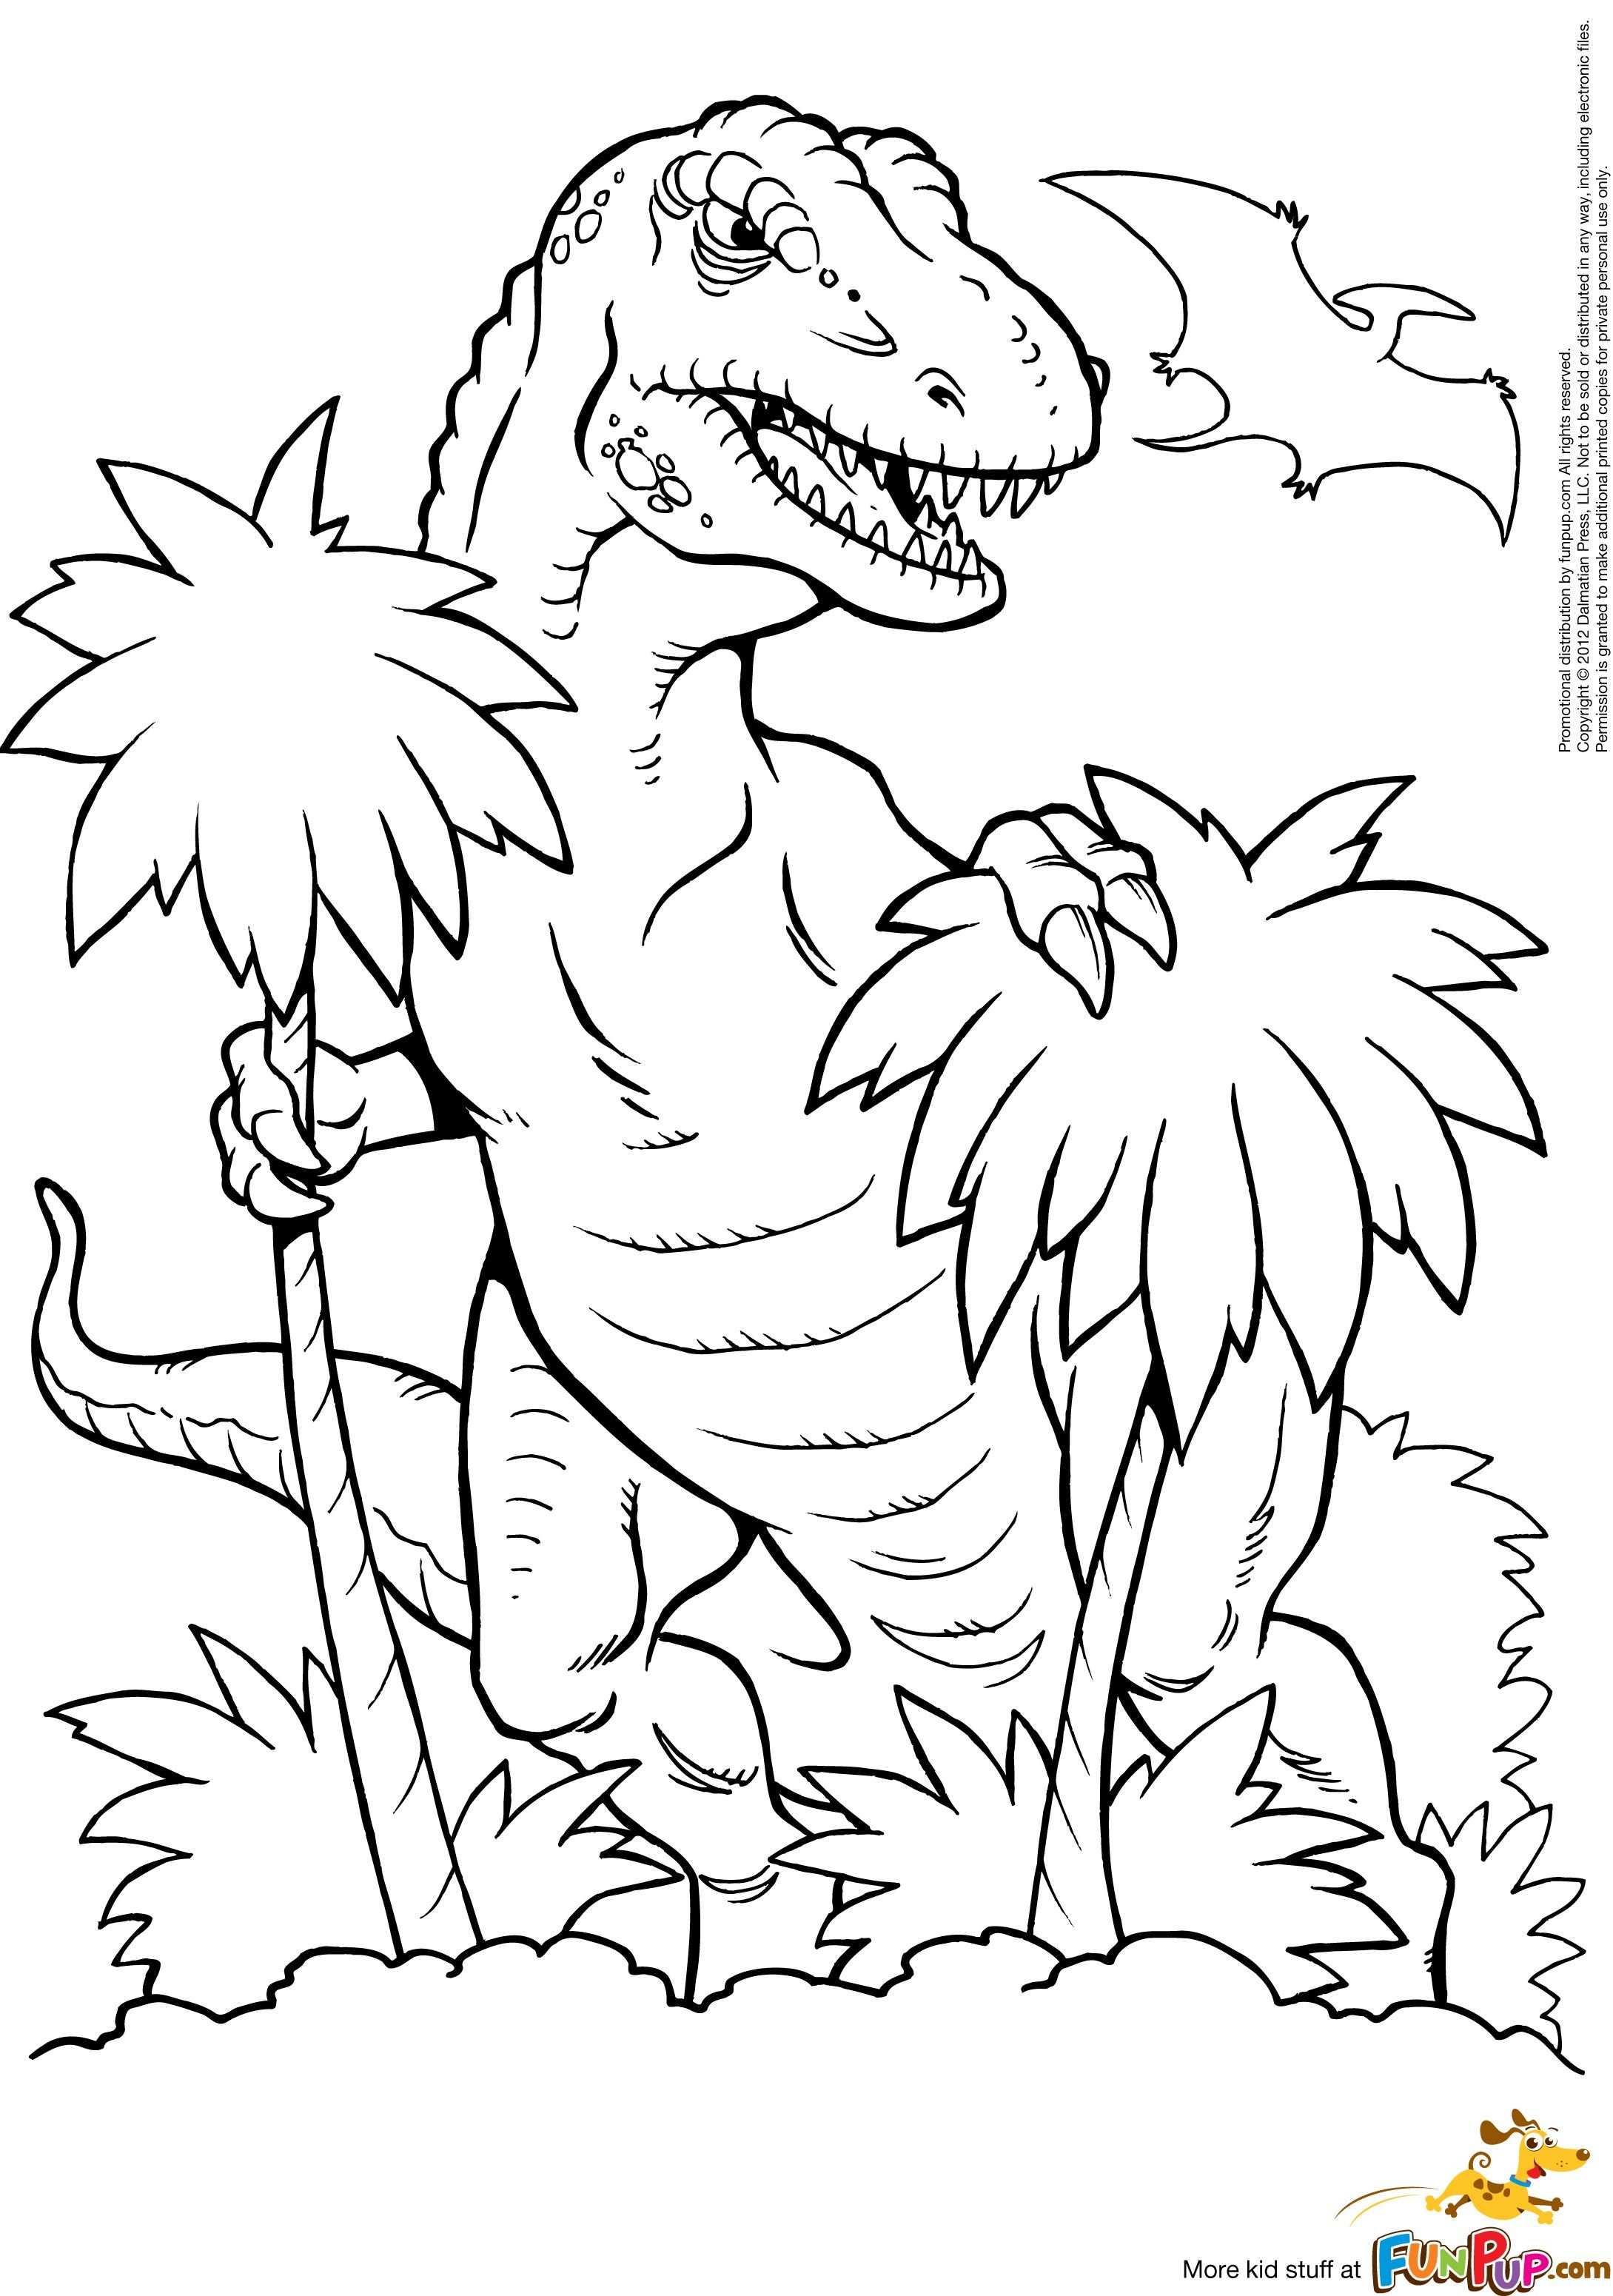 Large T Rex 0 00 Con Immagini Adult Coloring Pages Disegni